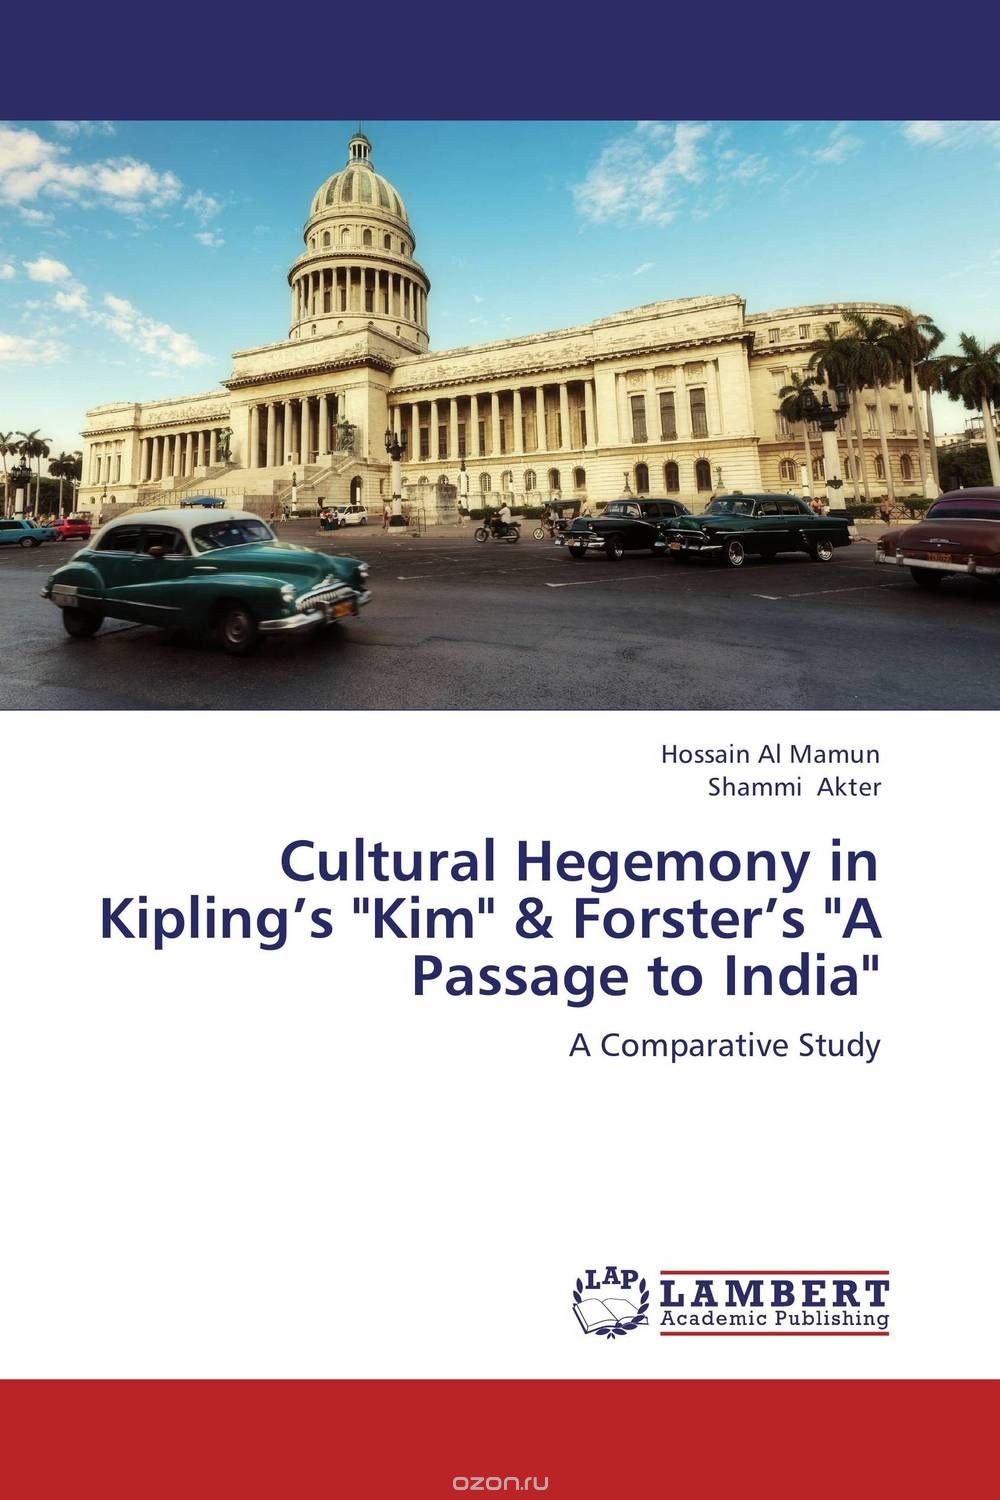 Cultural Hegemony in Kipling’s "Kim" & Forster’s "A Passage to India"